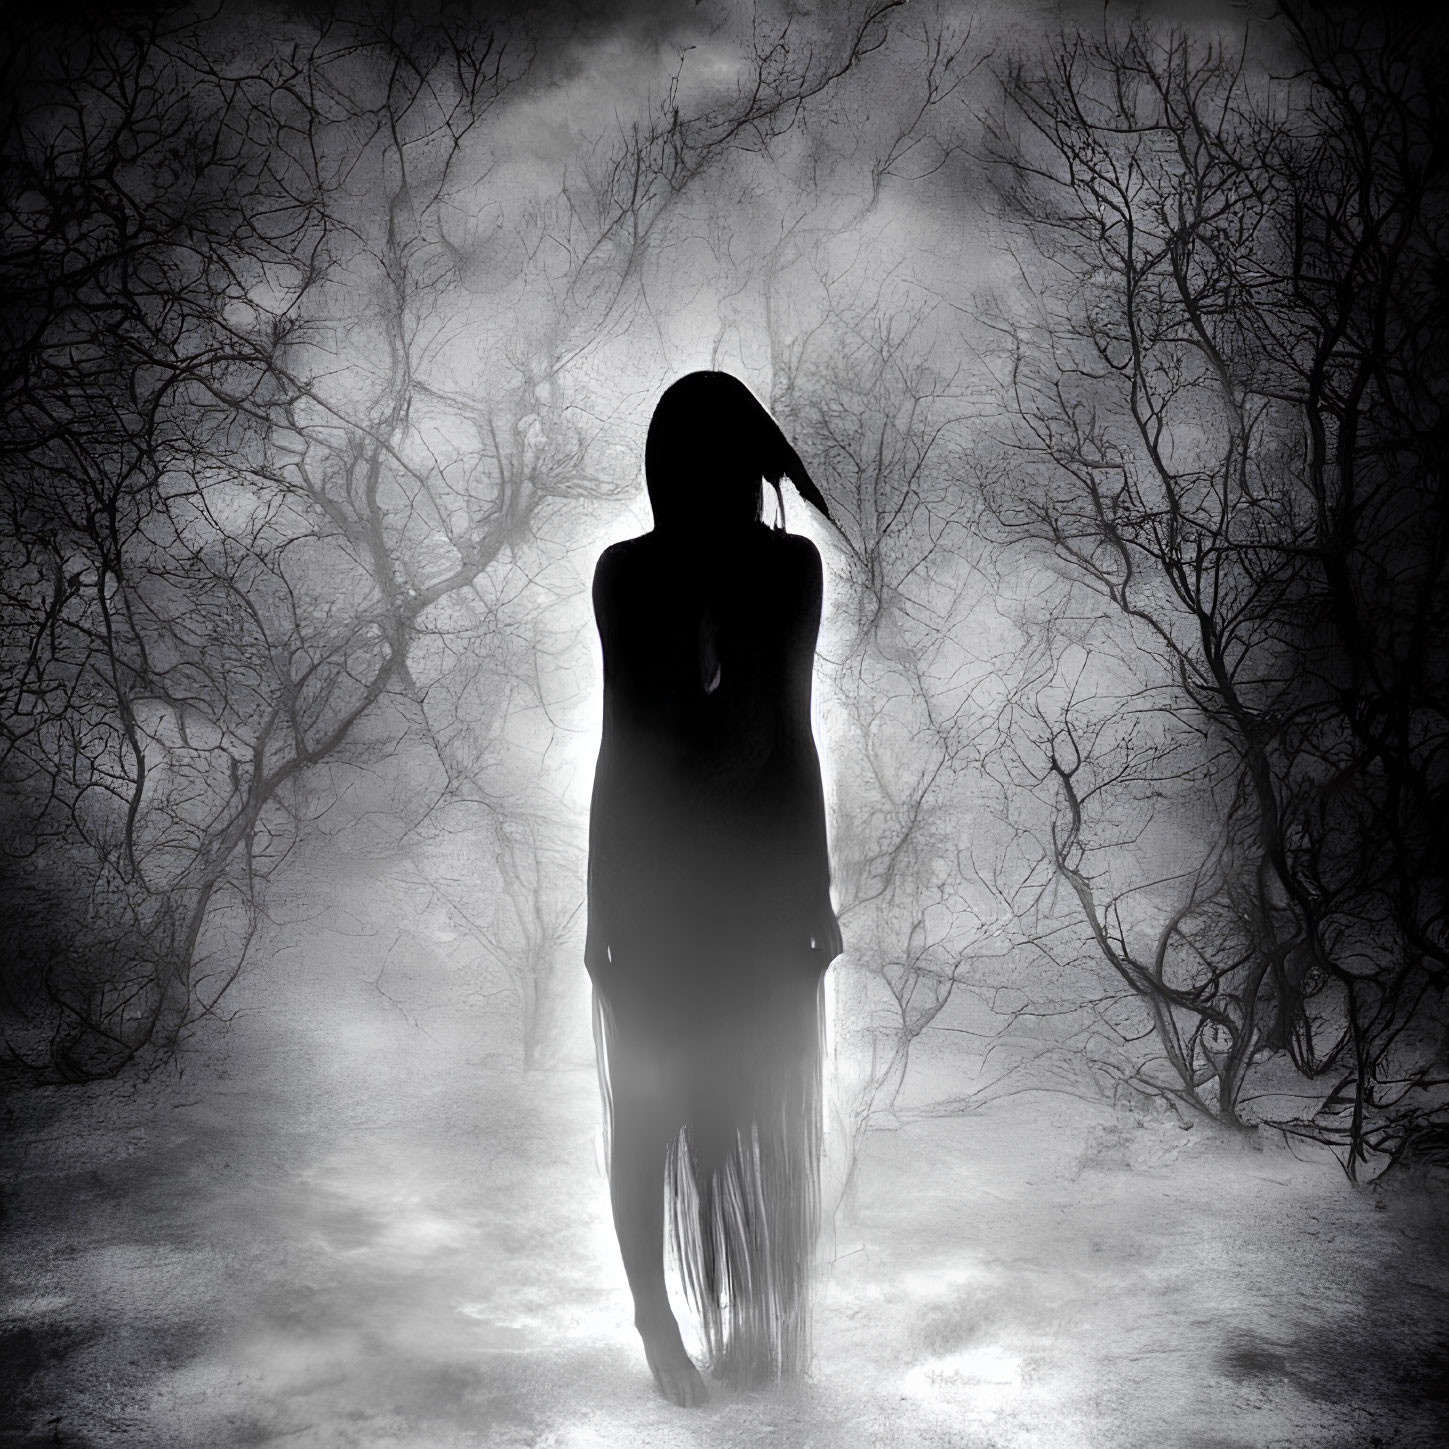 Silhouette of person in eerie misty forest with gnarled trees